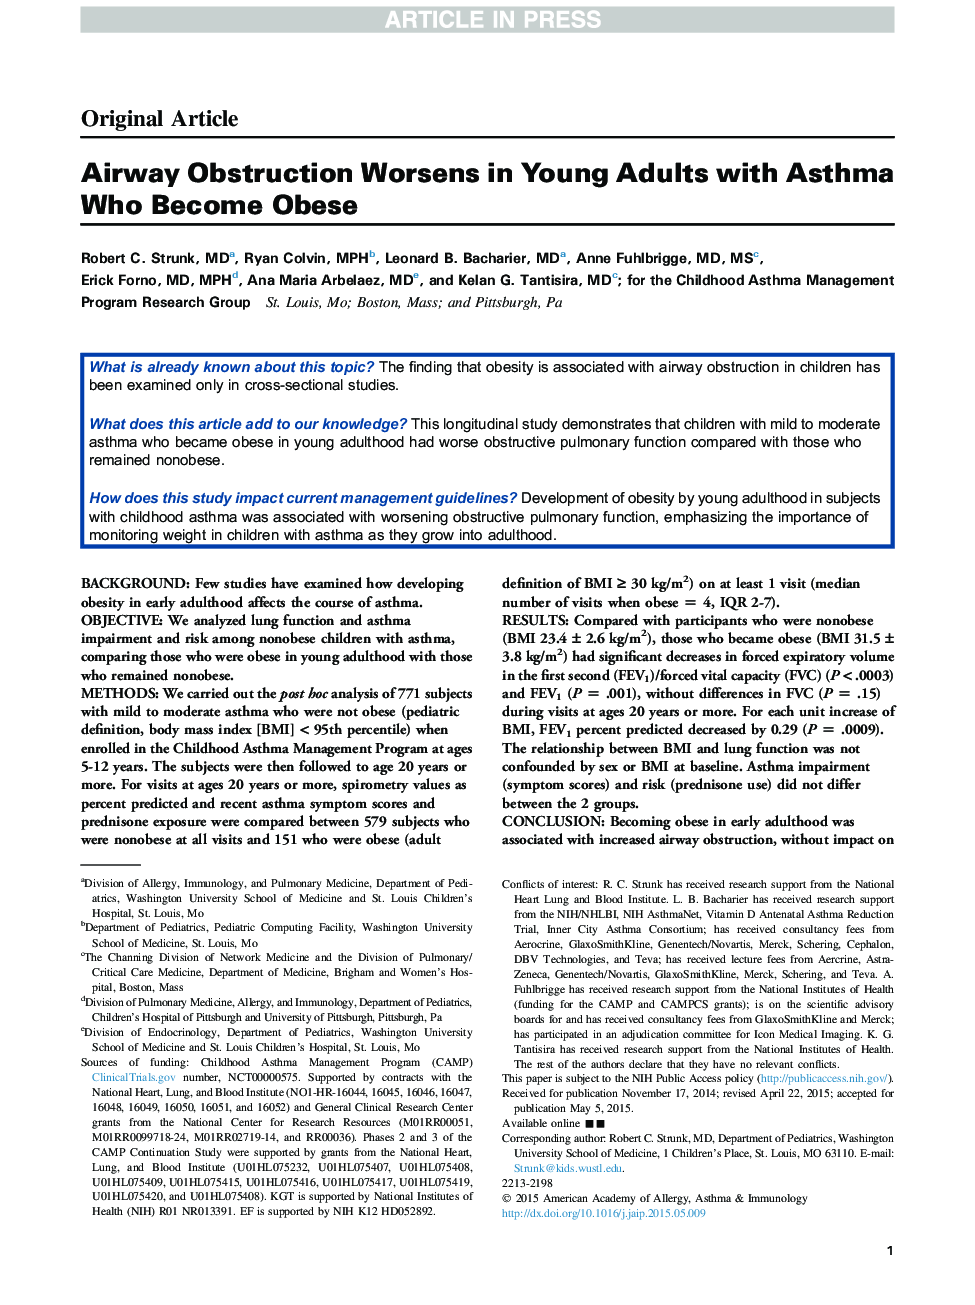 Airway Obstruction Worsens in Young Adults with Asthma Who Become Obese